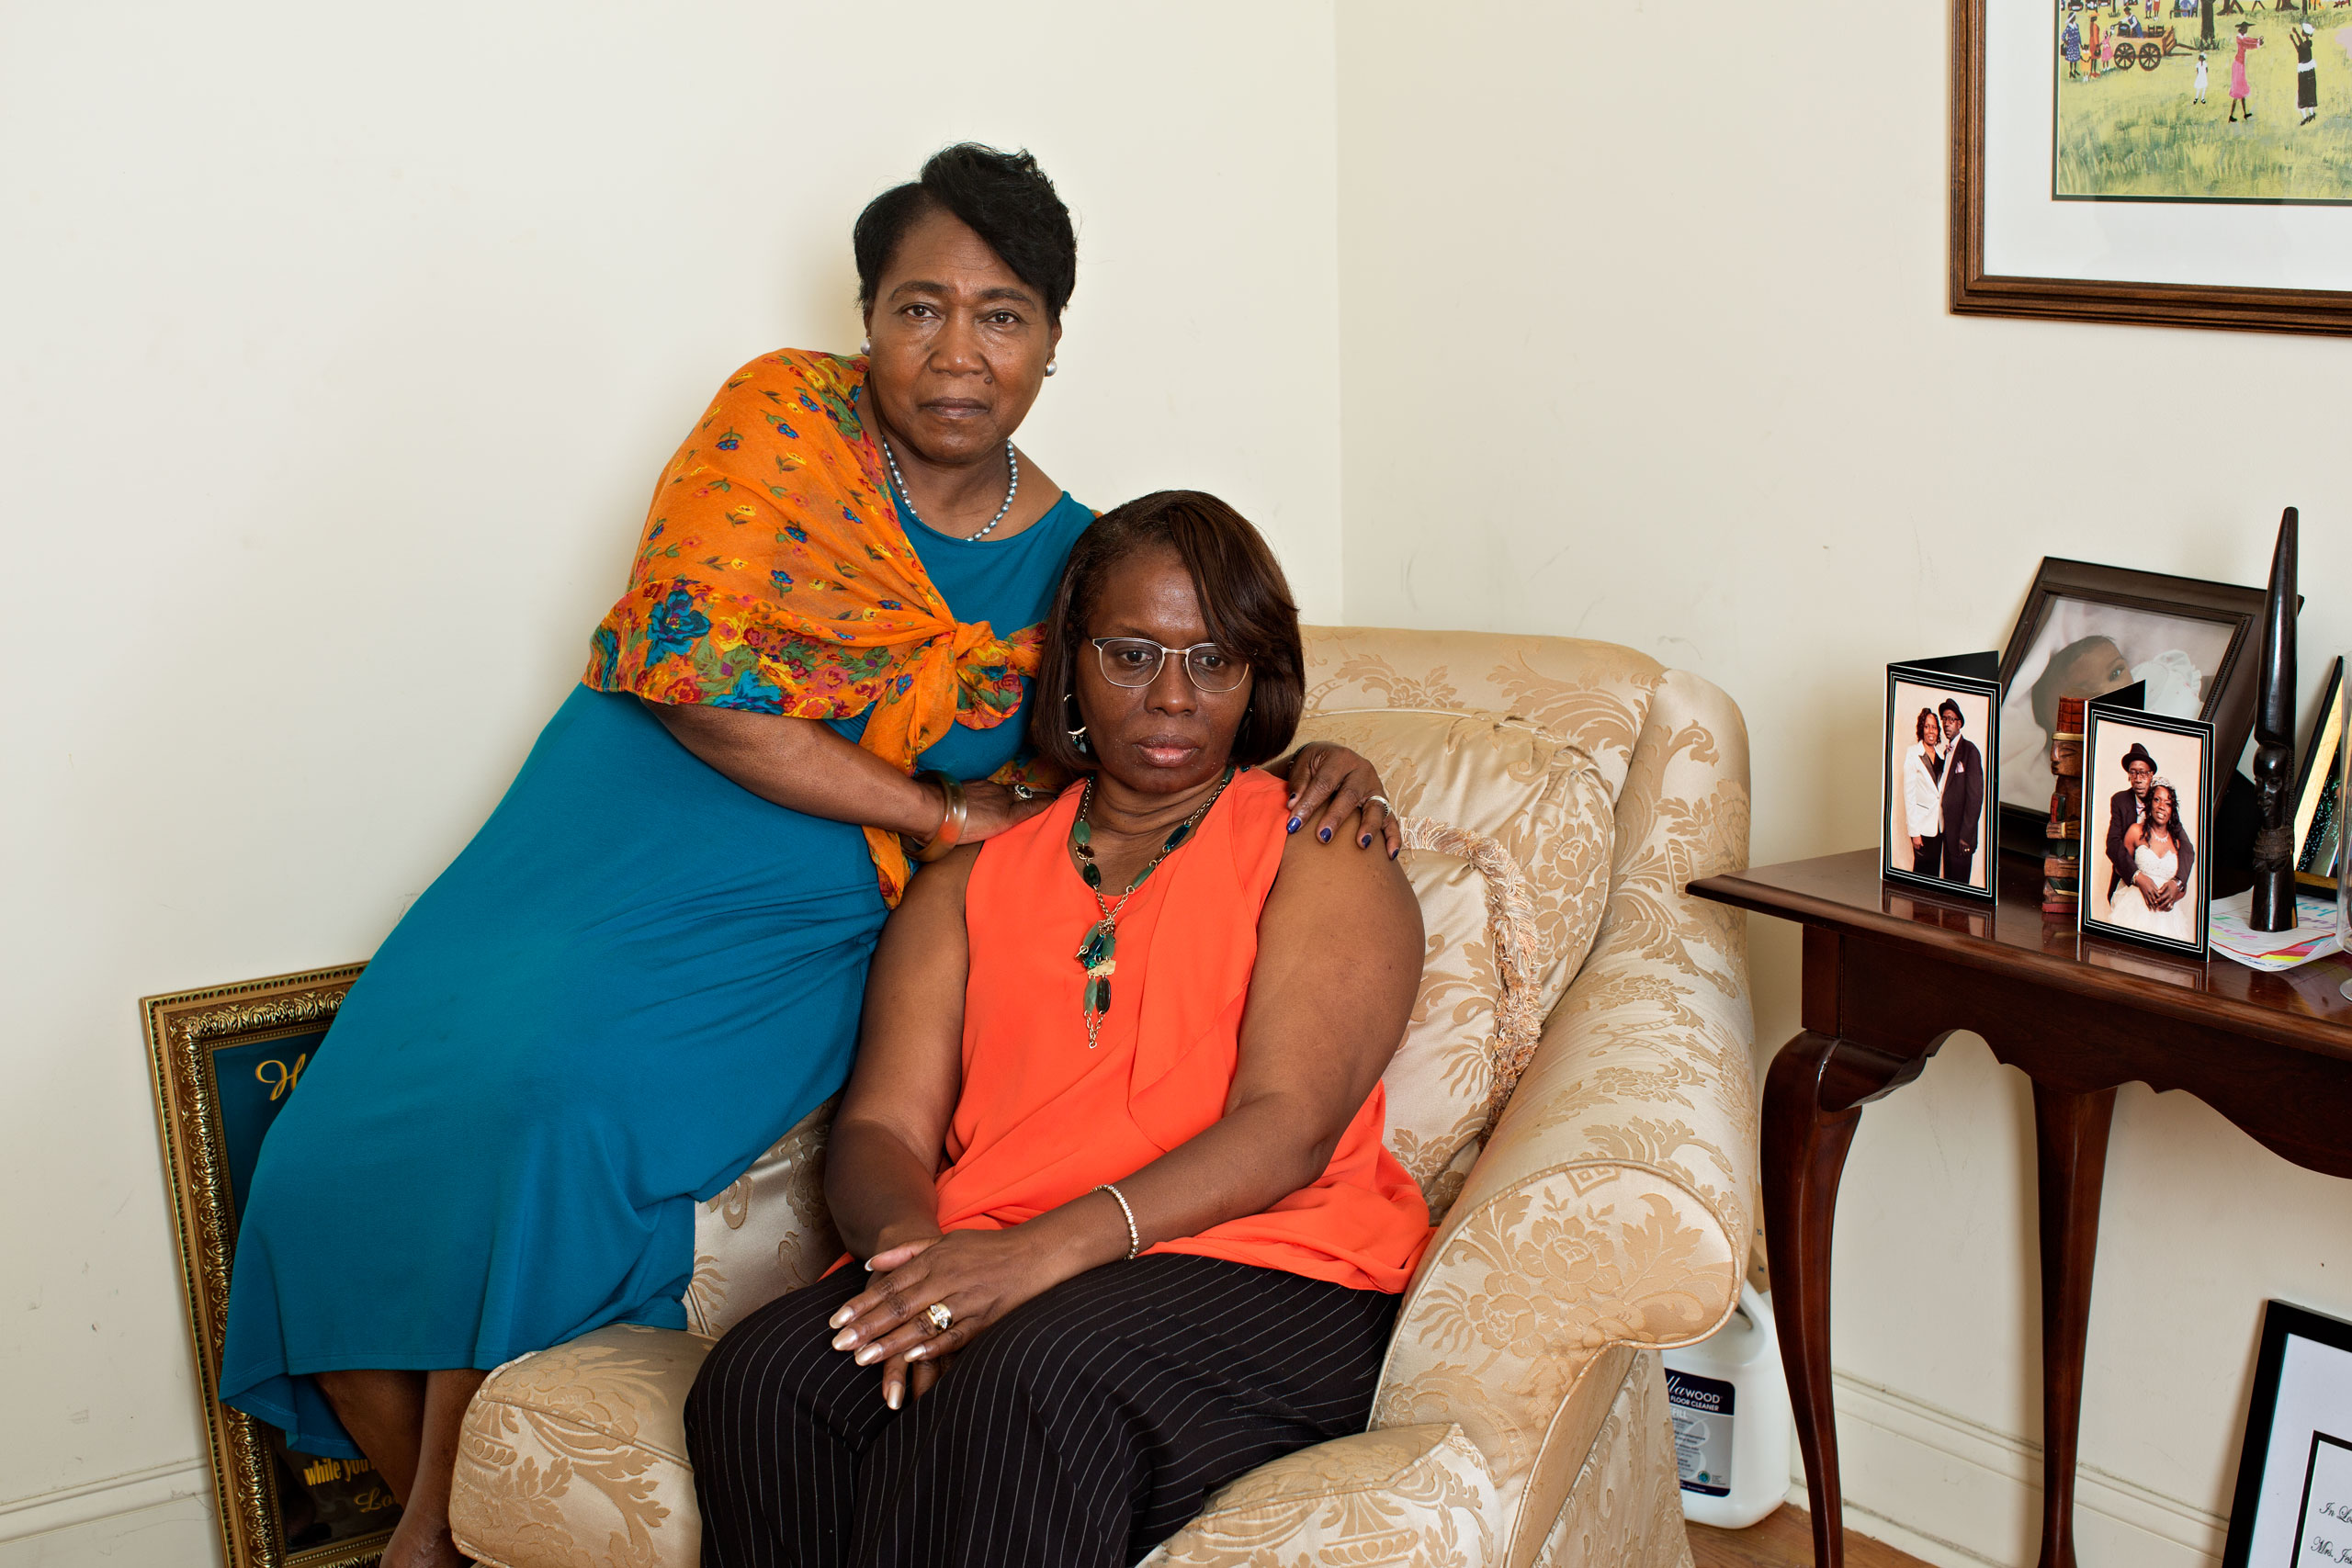 <b>Polly Sheppard, left, and Felicia Sanders</b>
                      
                      The longtime friends, seen at Sanders’ Charleston home, both survived the massacre. The killer spared Sheppard at gunpoint so 
                      she would tell 
                      what happened (Deana Lawson for TIME)